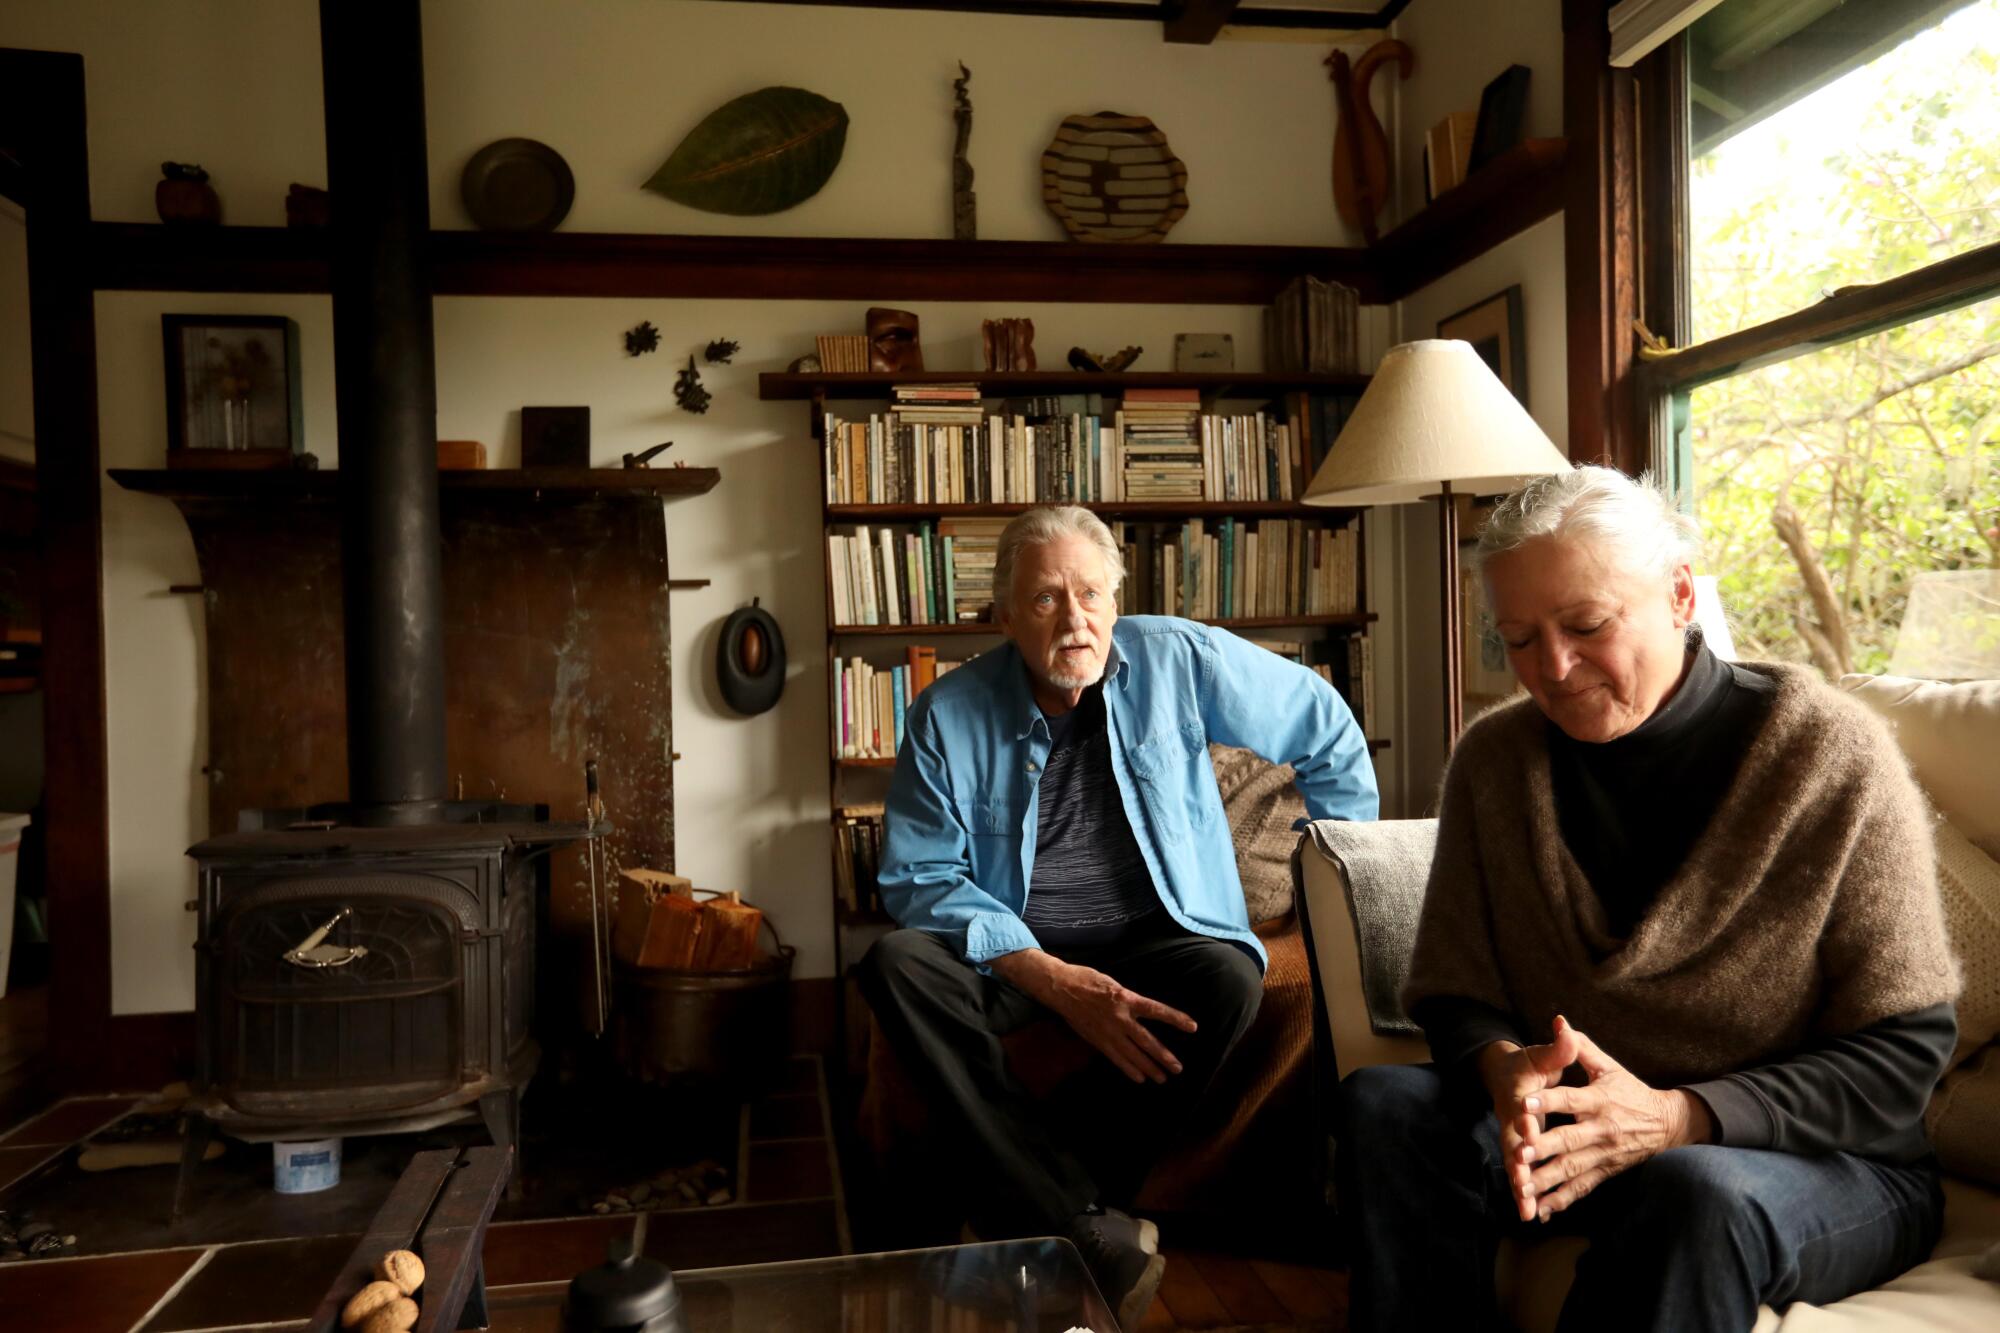 A man and woman in their 70s sit in an eclectic home filled with art and books.